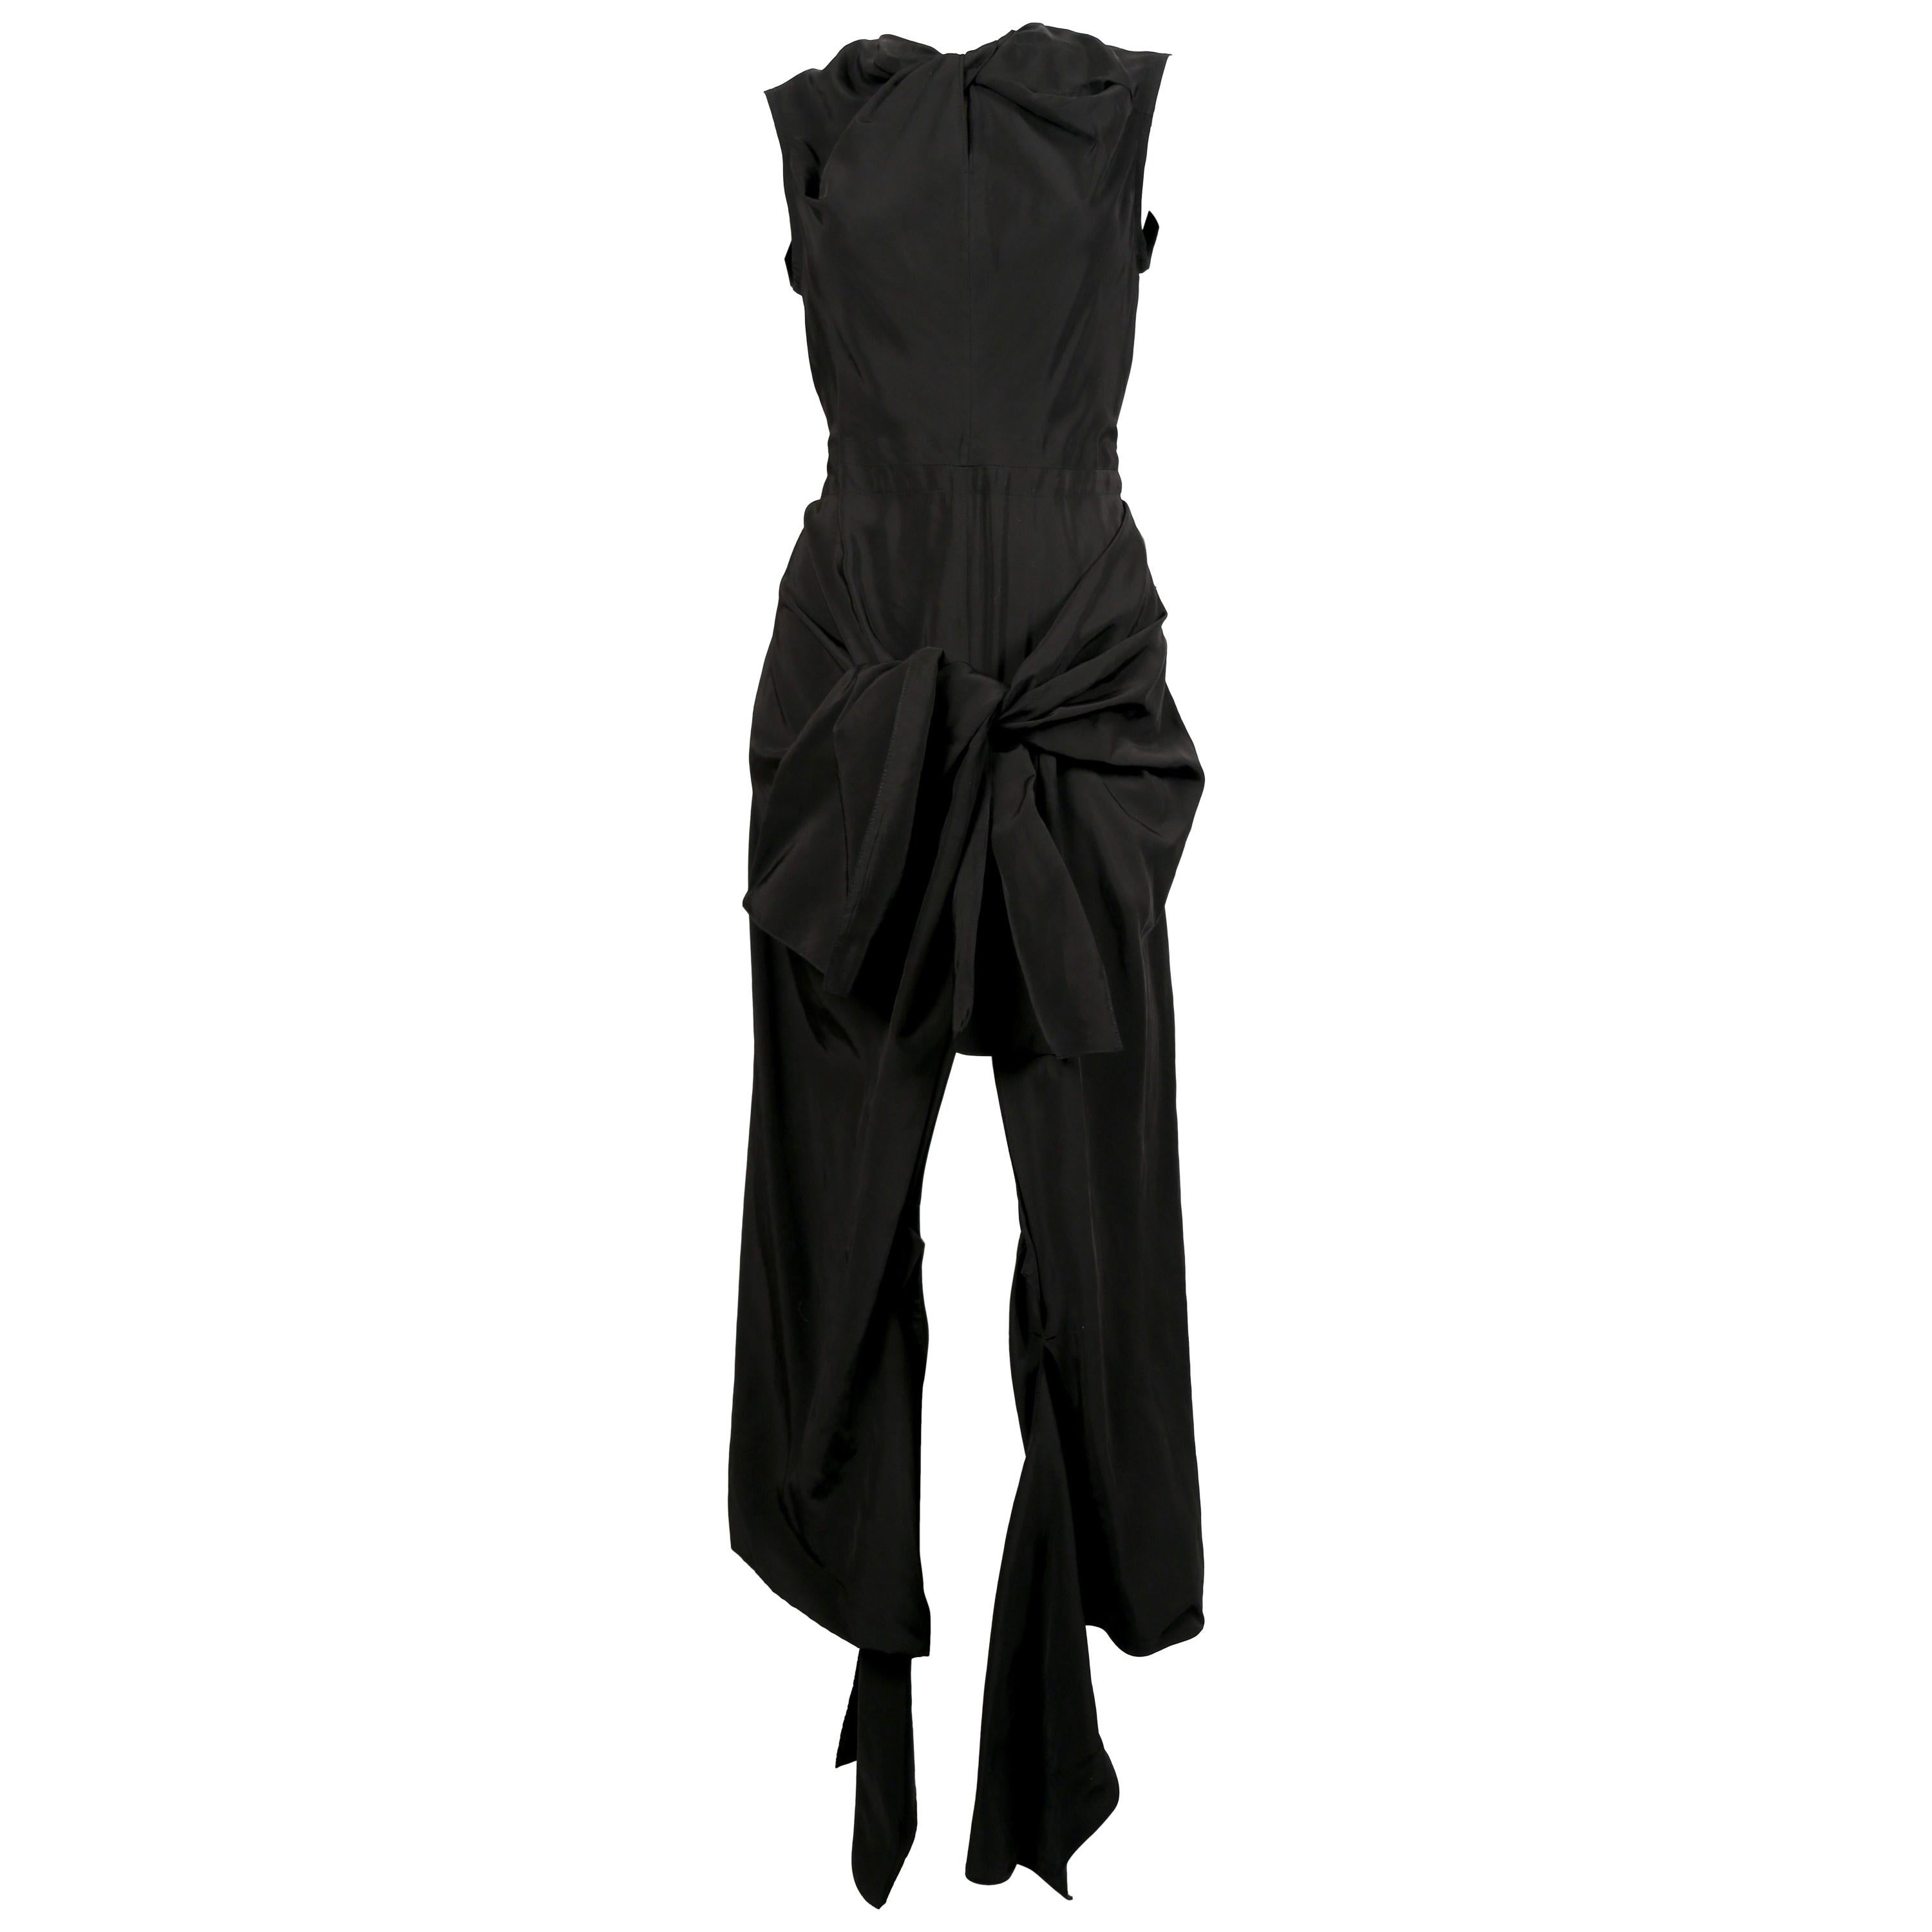 new CELINE By PHOEBE PHILO black dress with ties and cut out back For Sale